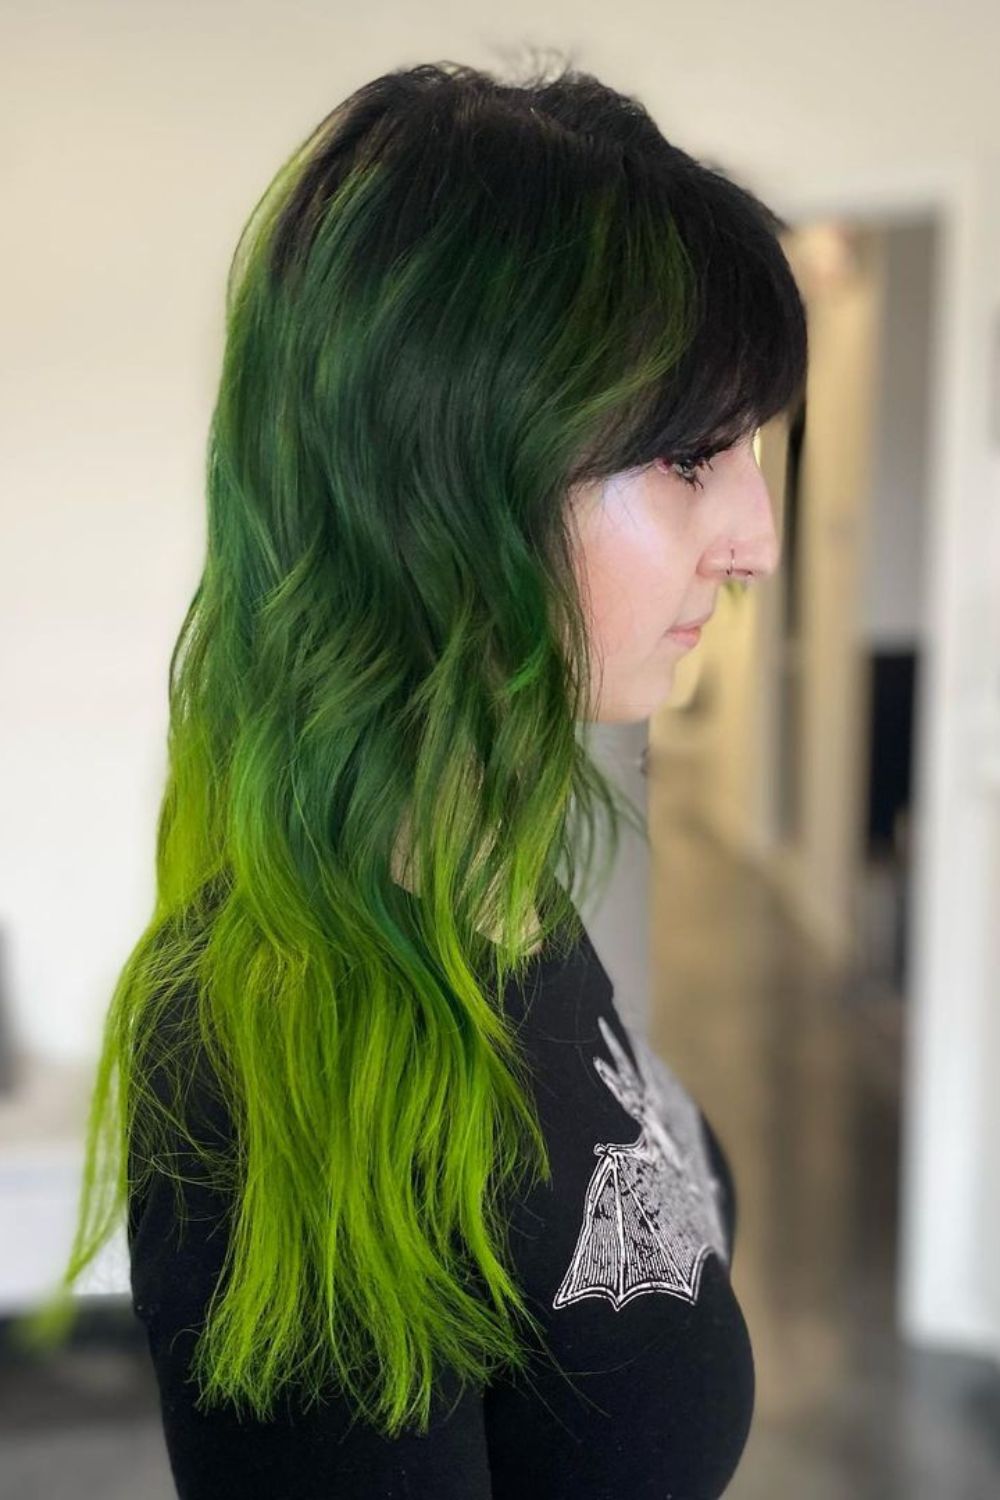 A woman with dark to light green ombre hair.